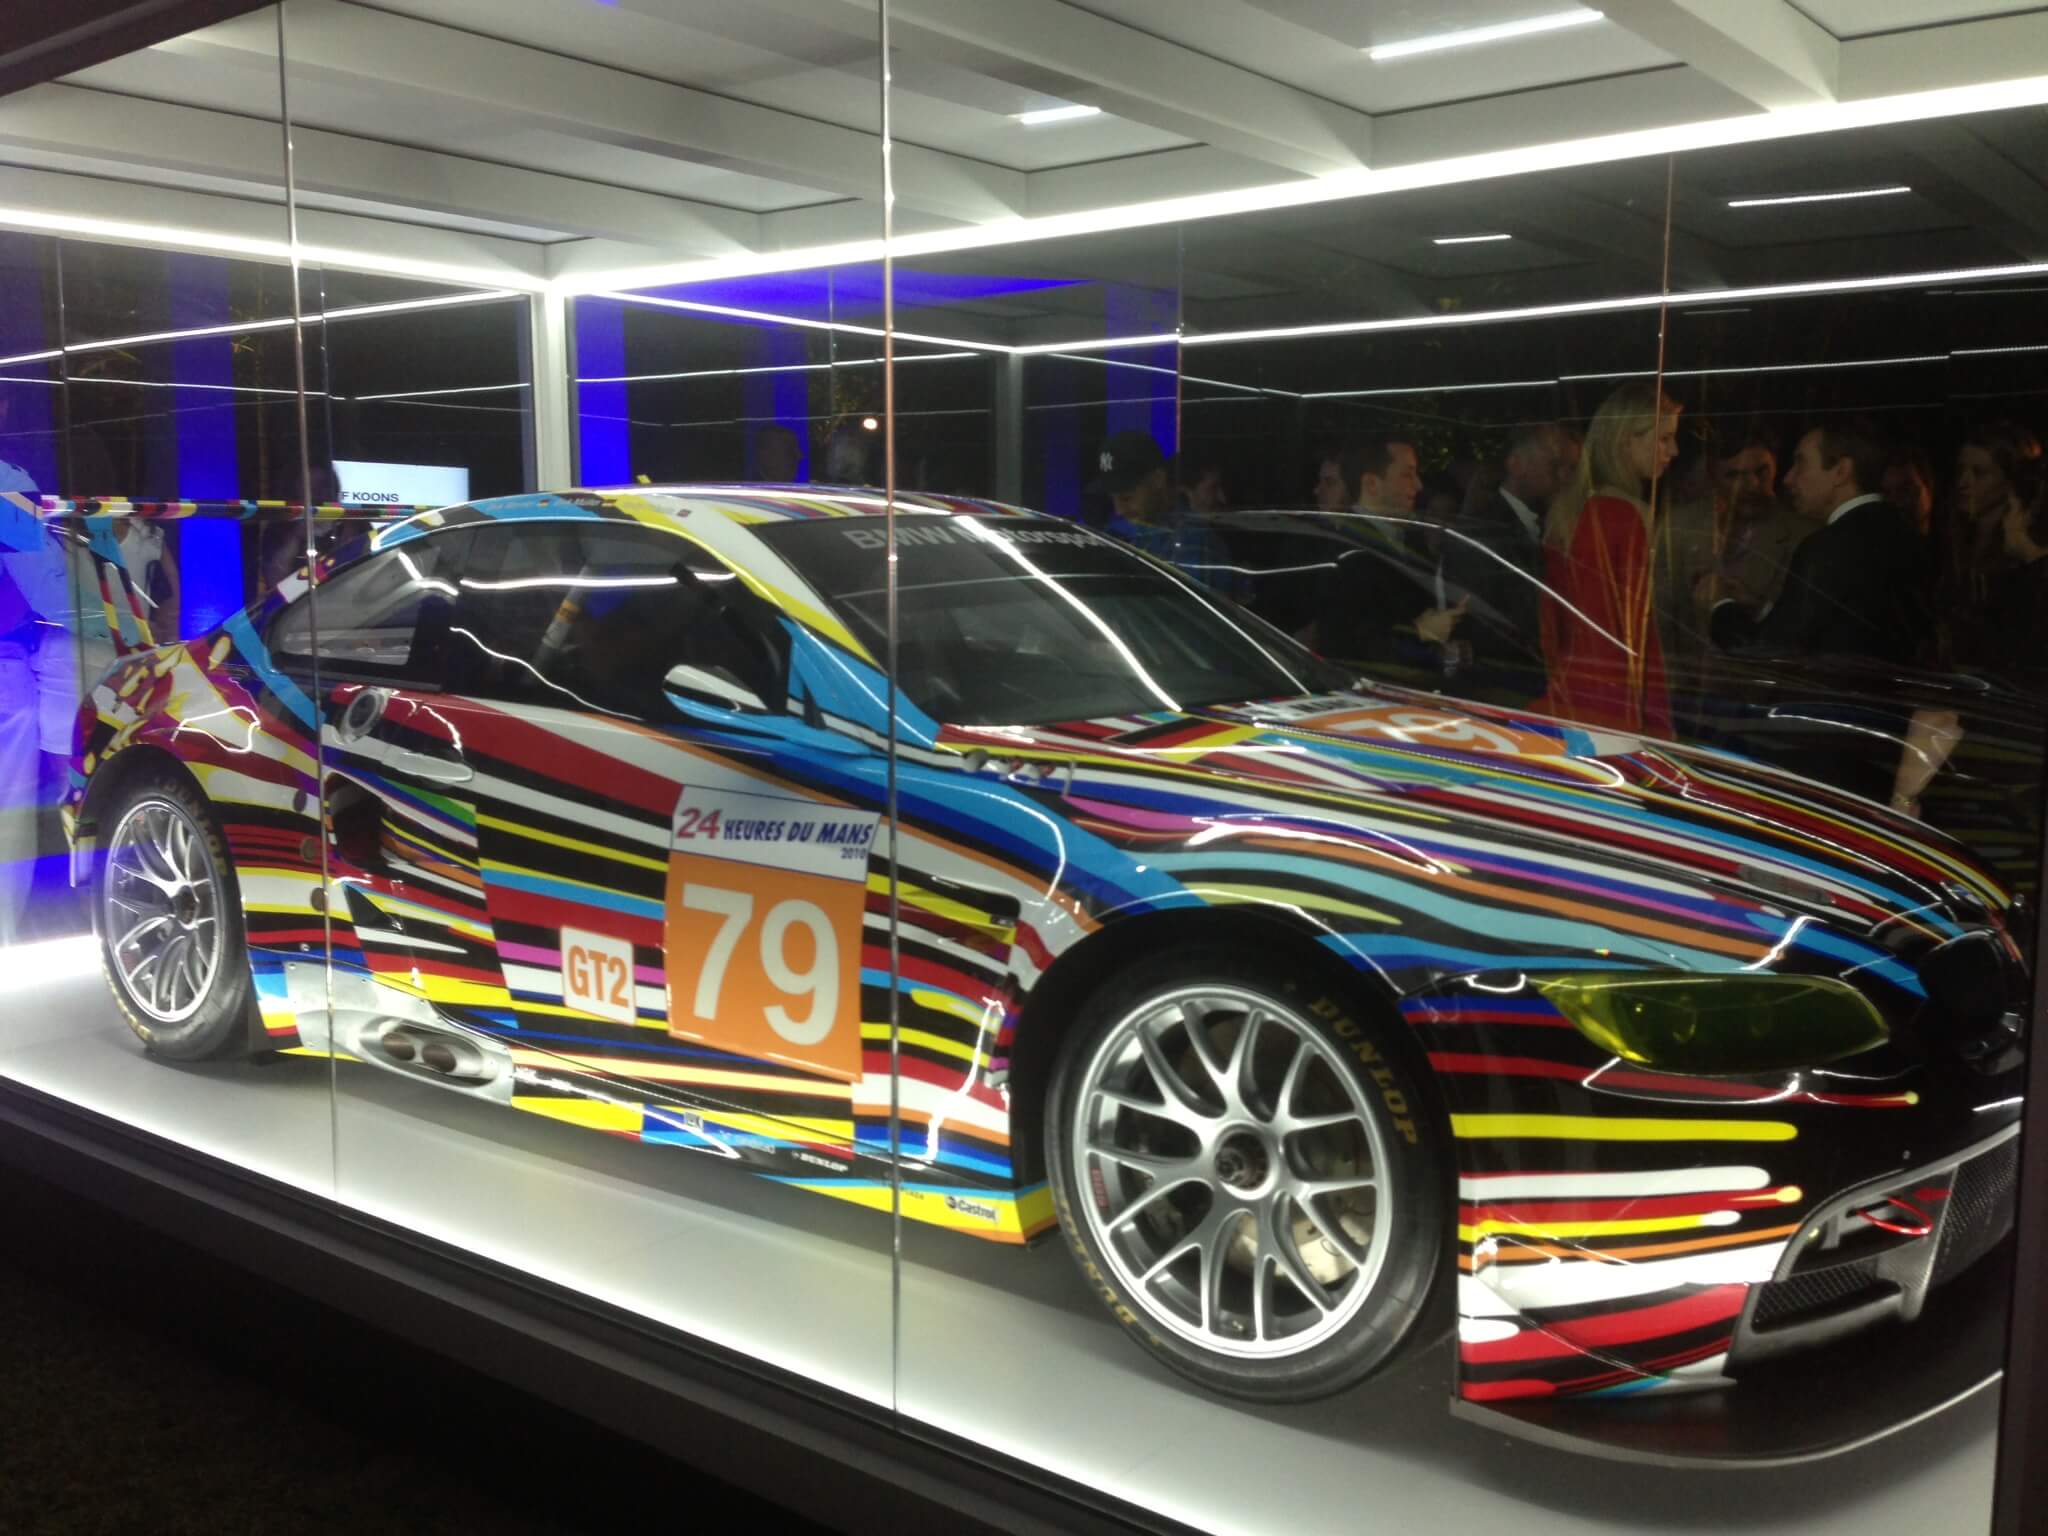 A colorful car on display in a glass case
